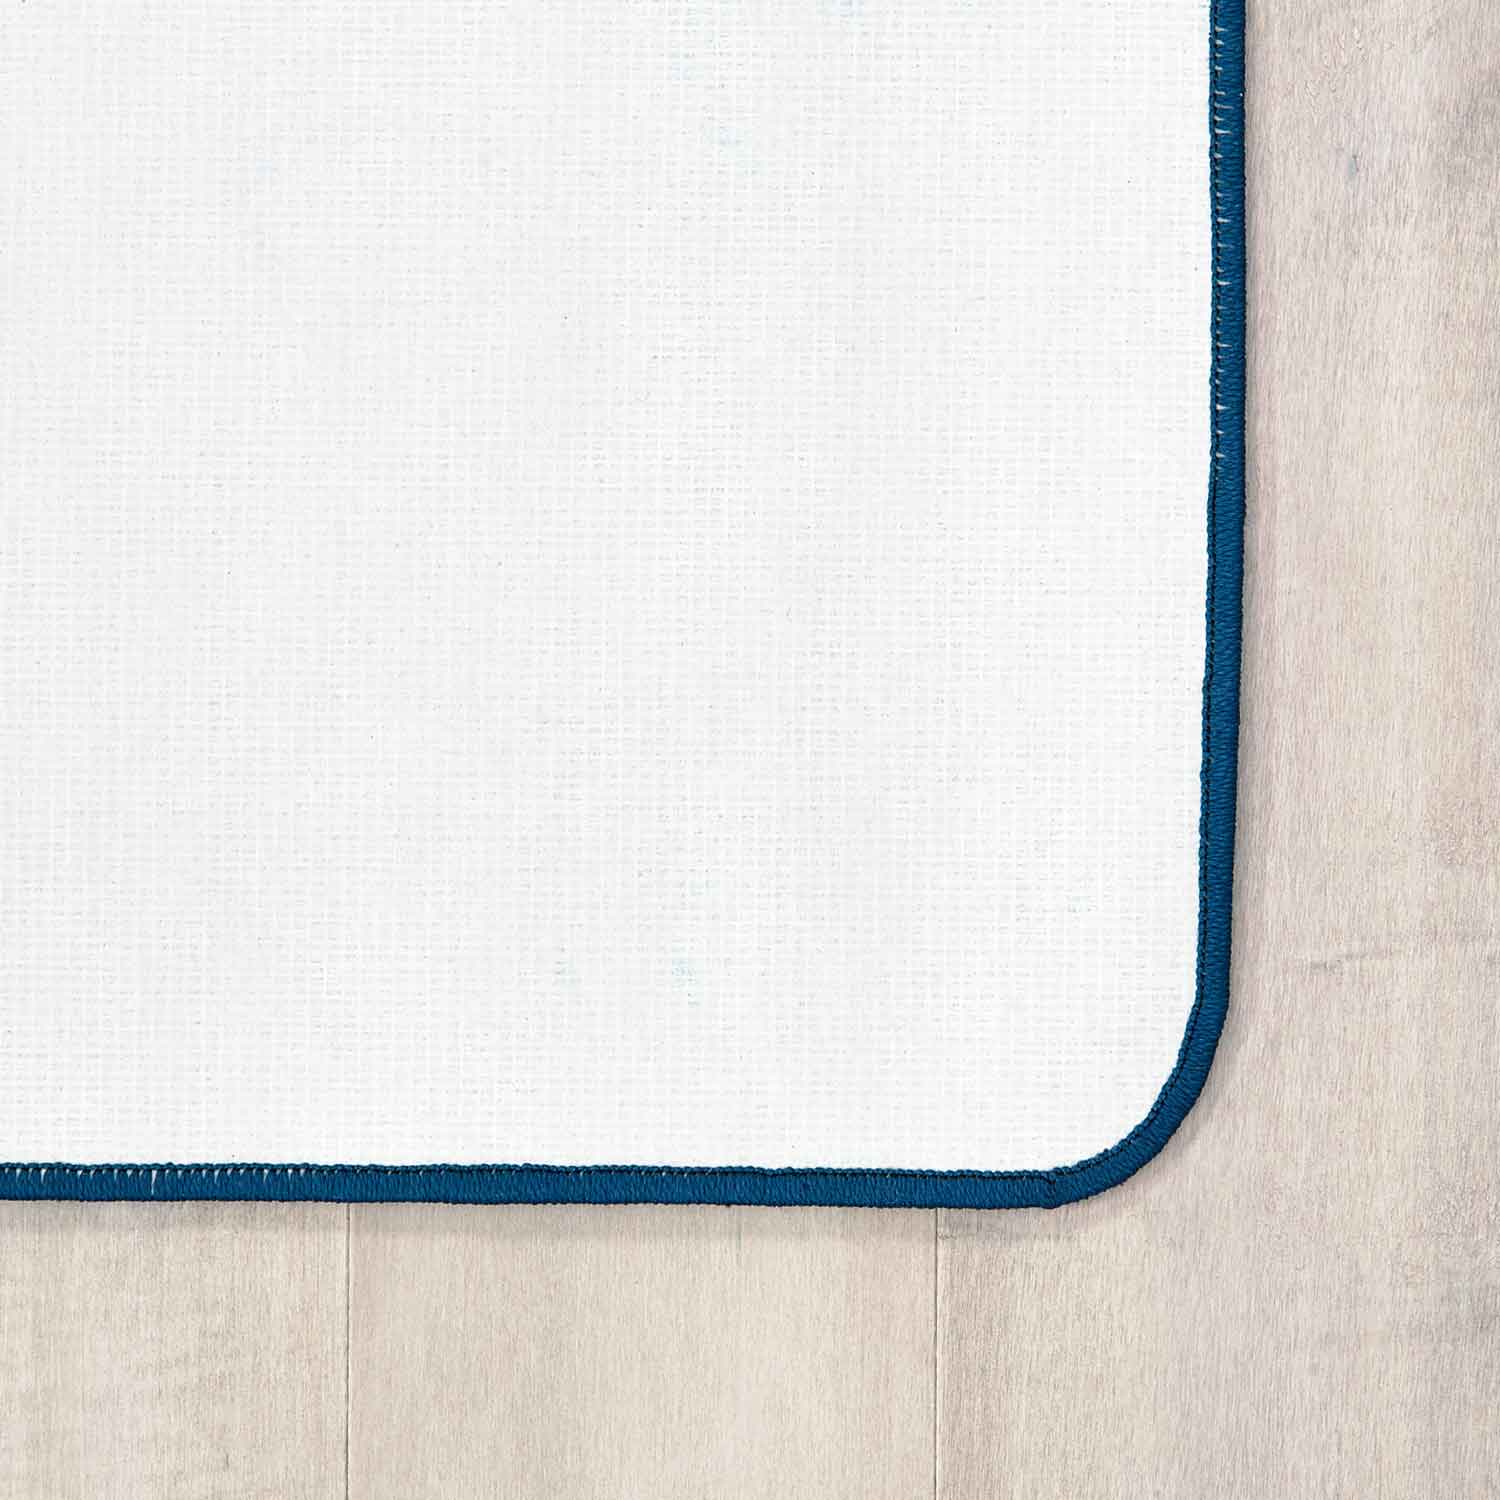 Pixel Perfect™ Calming Colors Seating Rug, Rectangle 6' x 9'